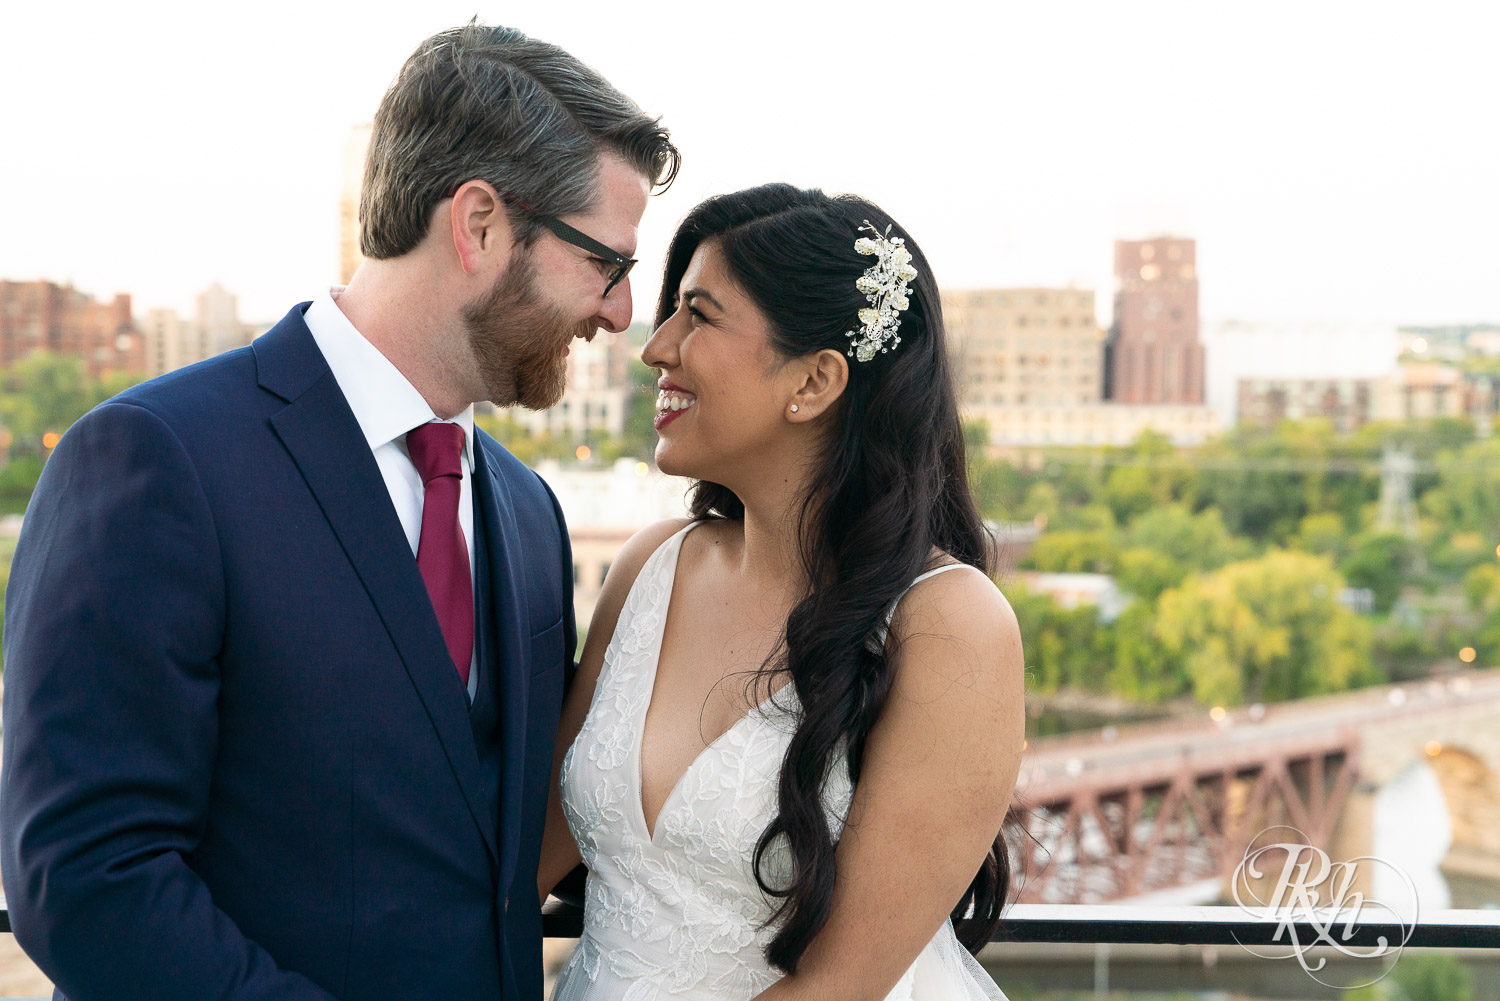 Bride and groom smiling on the roof of Mill City in Minneapolis, Minnesota with the skyline in the background.